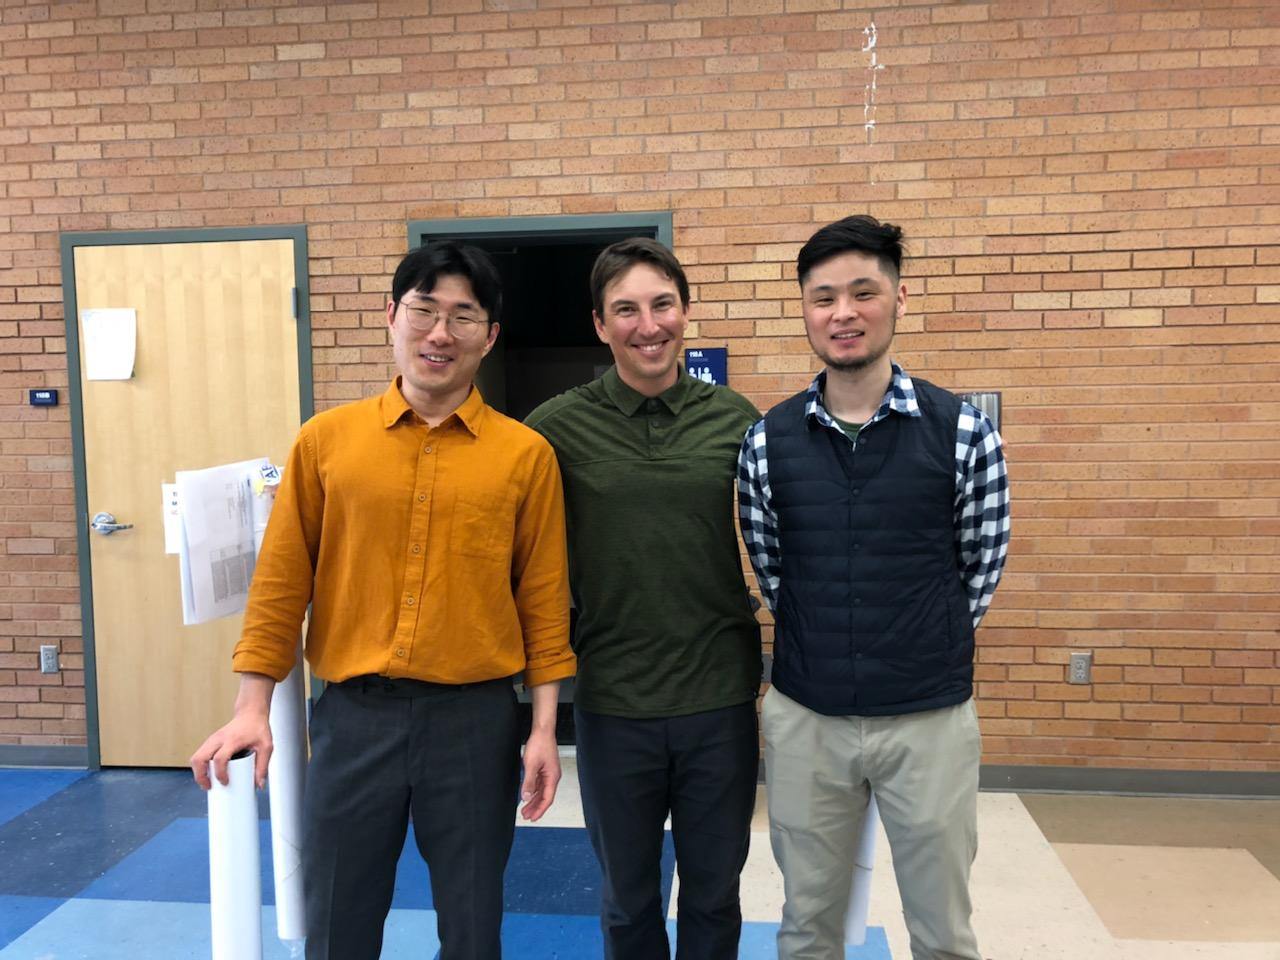 Youngwook Kim, Mike Vakula, & Joonsun Park who presented at the PhD Colloquium.